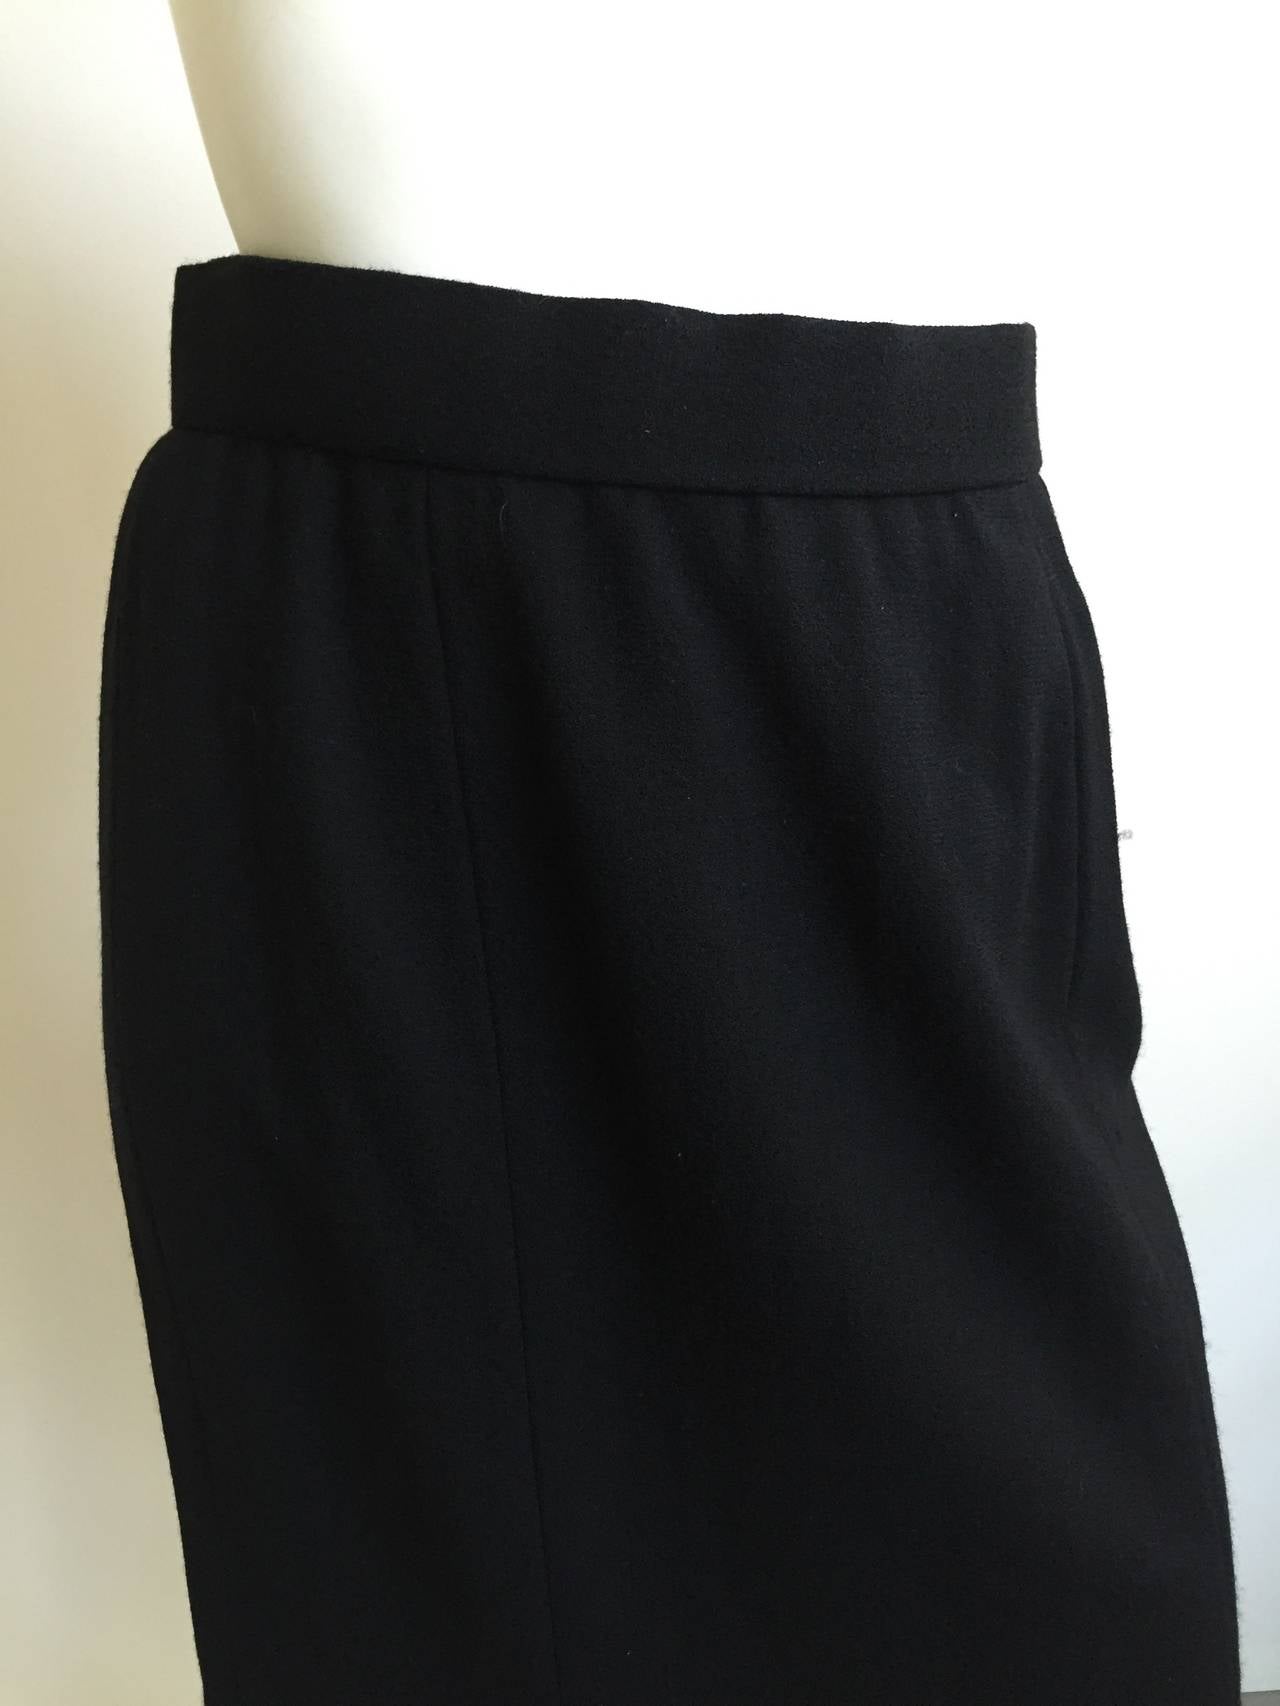 Bill Blass 1970s long black wool skirt original vintage size 12 but fits like a modern size 4/6. Ladies please grab your tape measure so you can properly measure your waist & hips to make certain this treasure will fit your lovely body. Fits high at